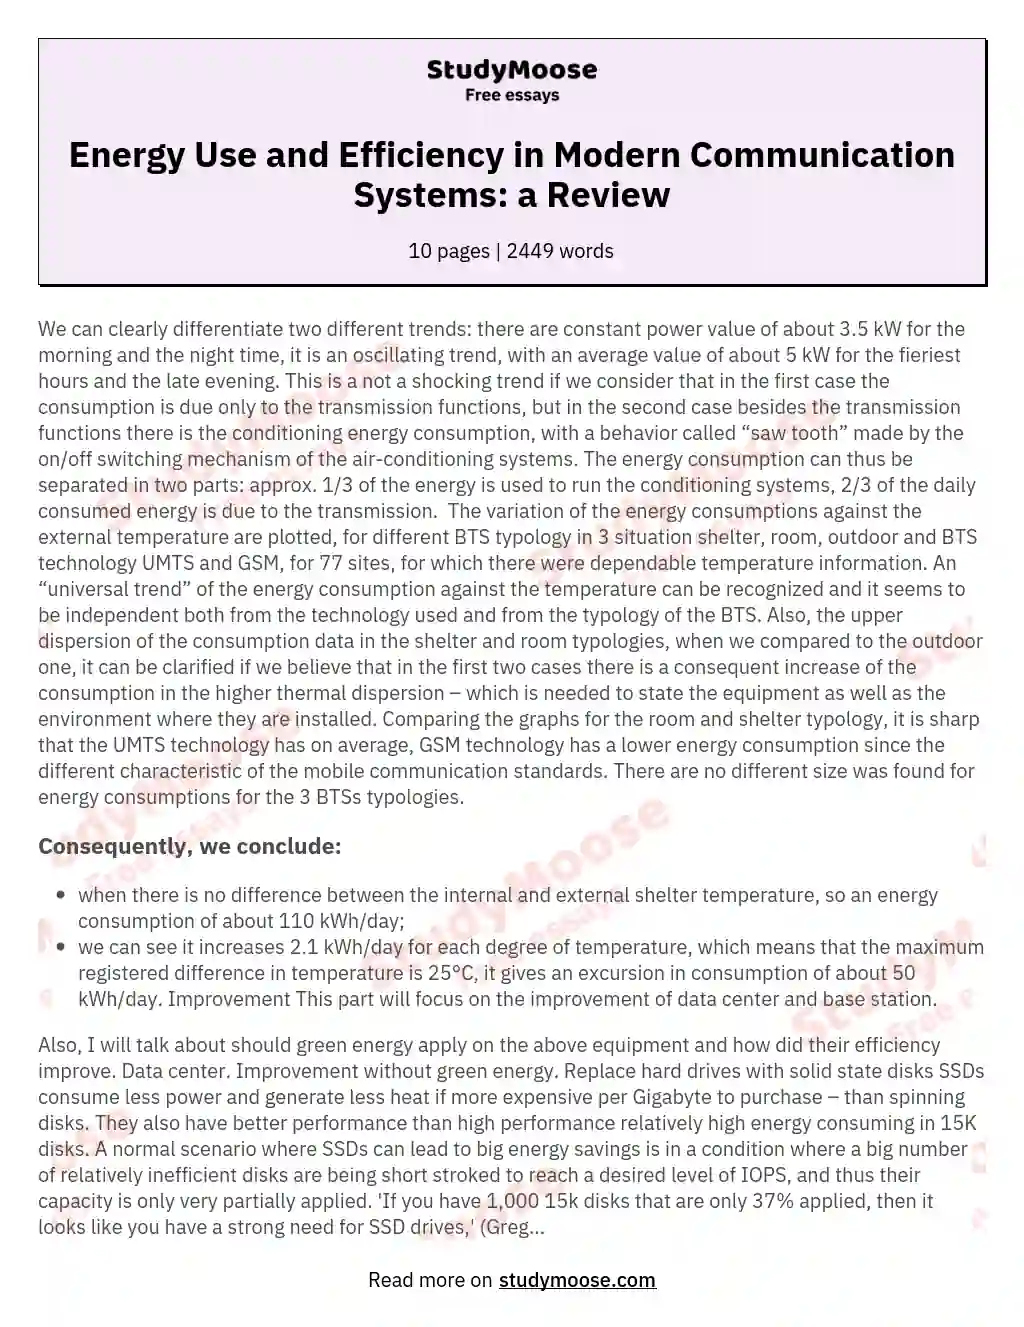 Energy Use and Efficiency in Modern Communication Systems: a Review essay